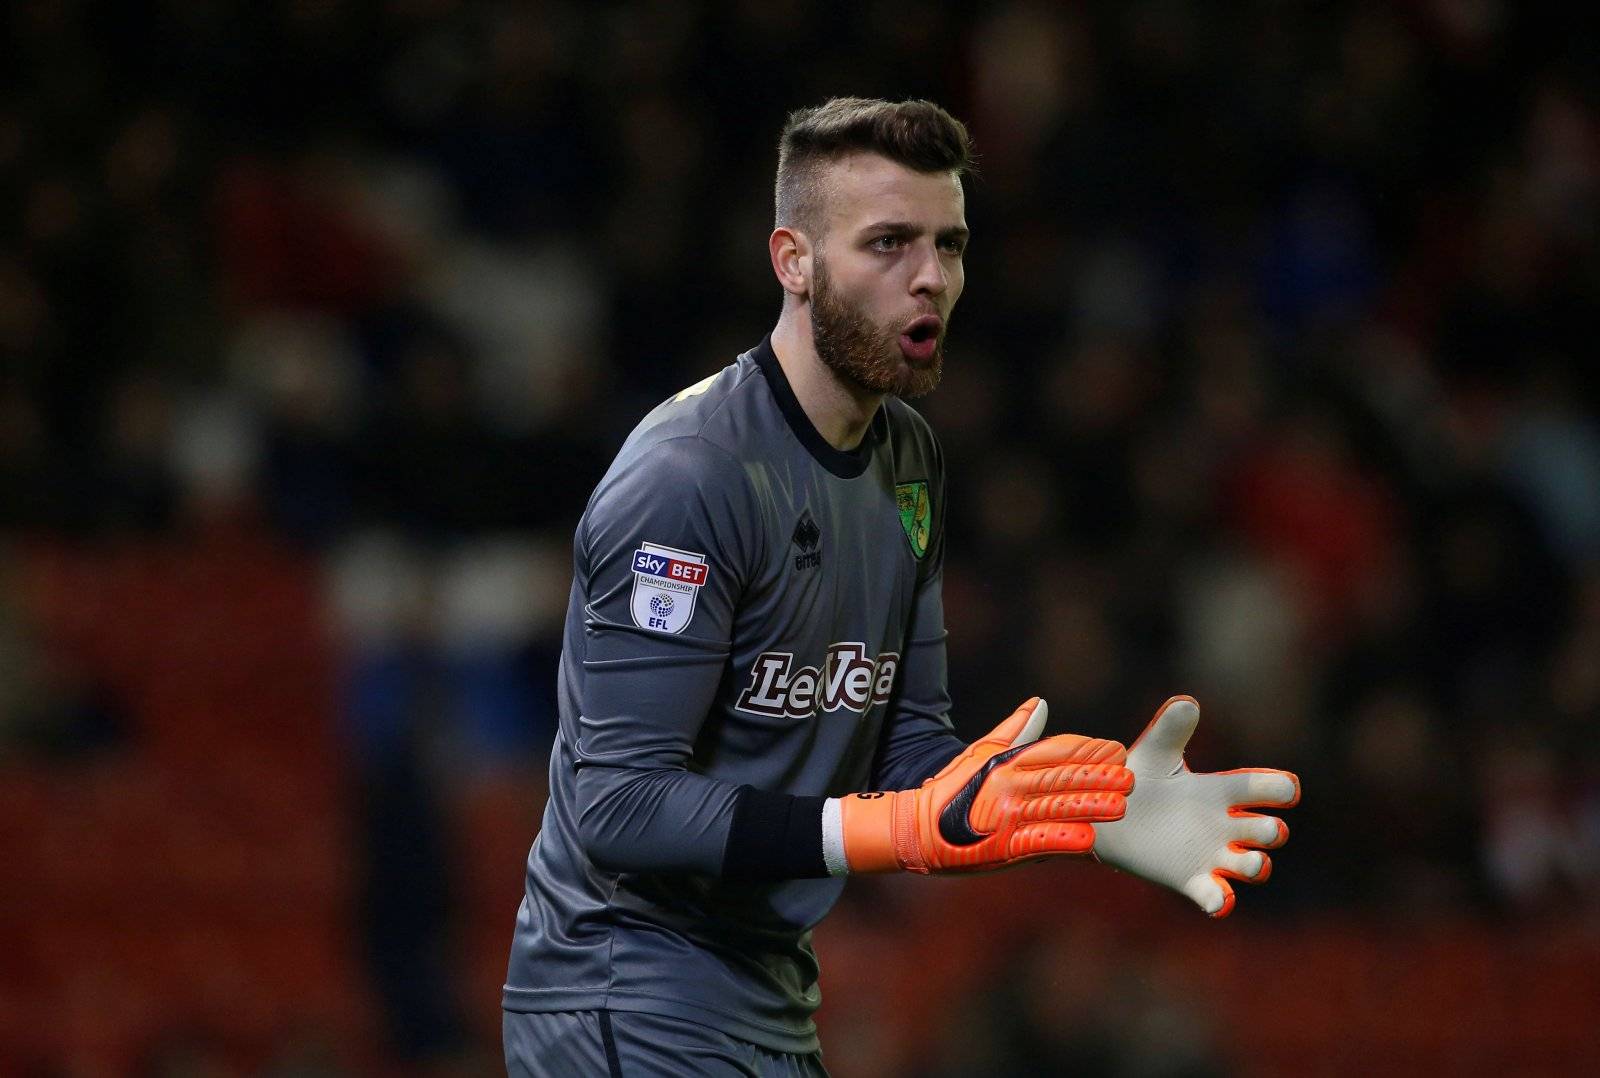 Norwich: Angus Gunn set for Canaries medical - Norwich City